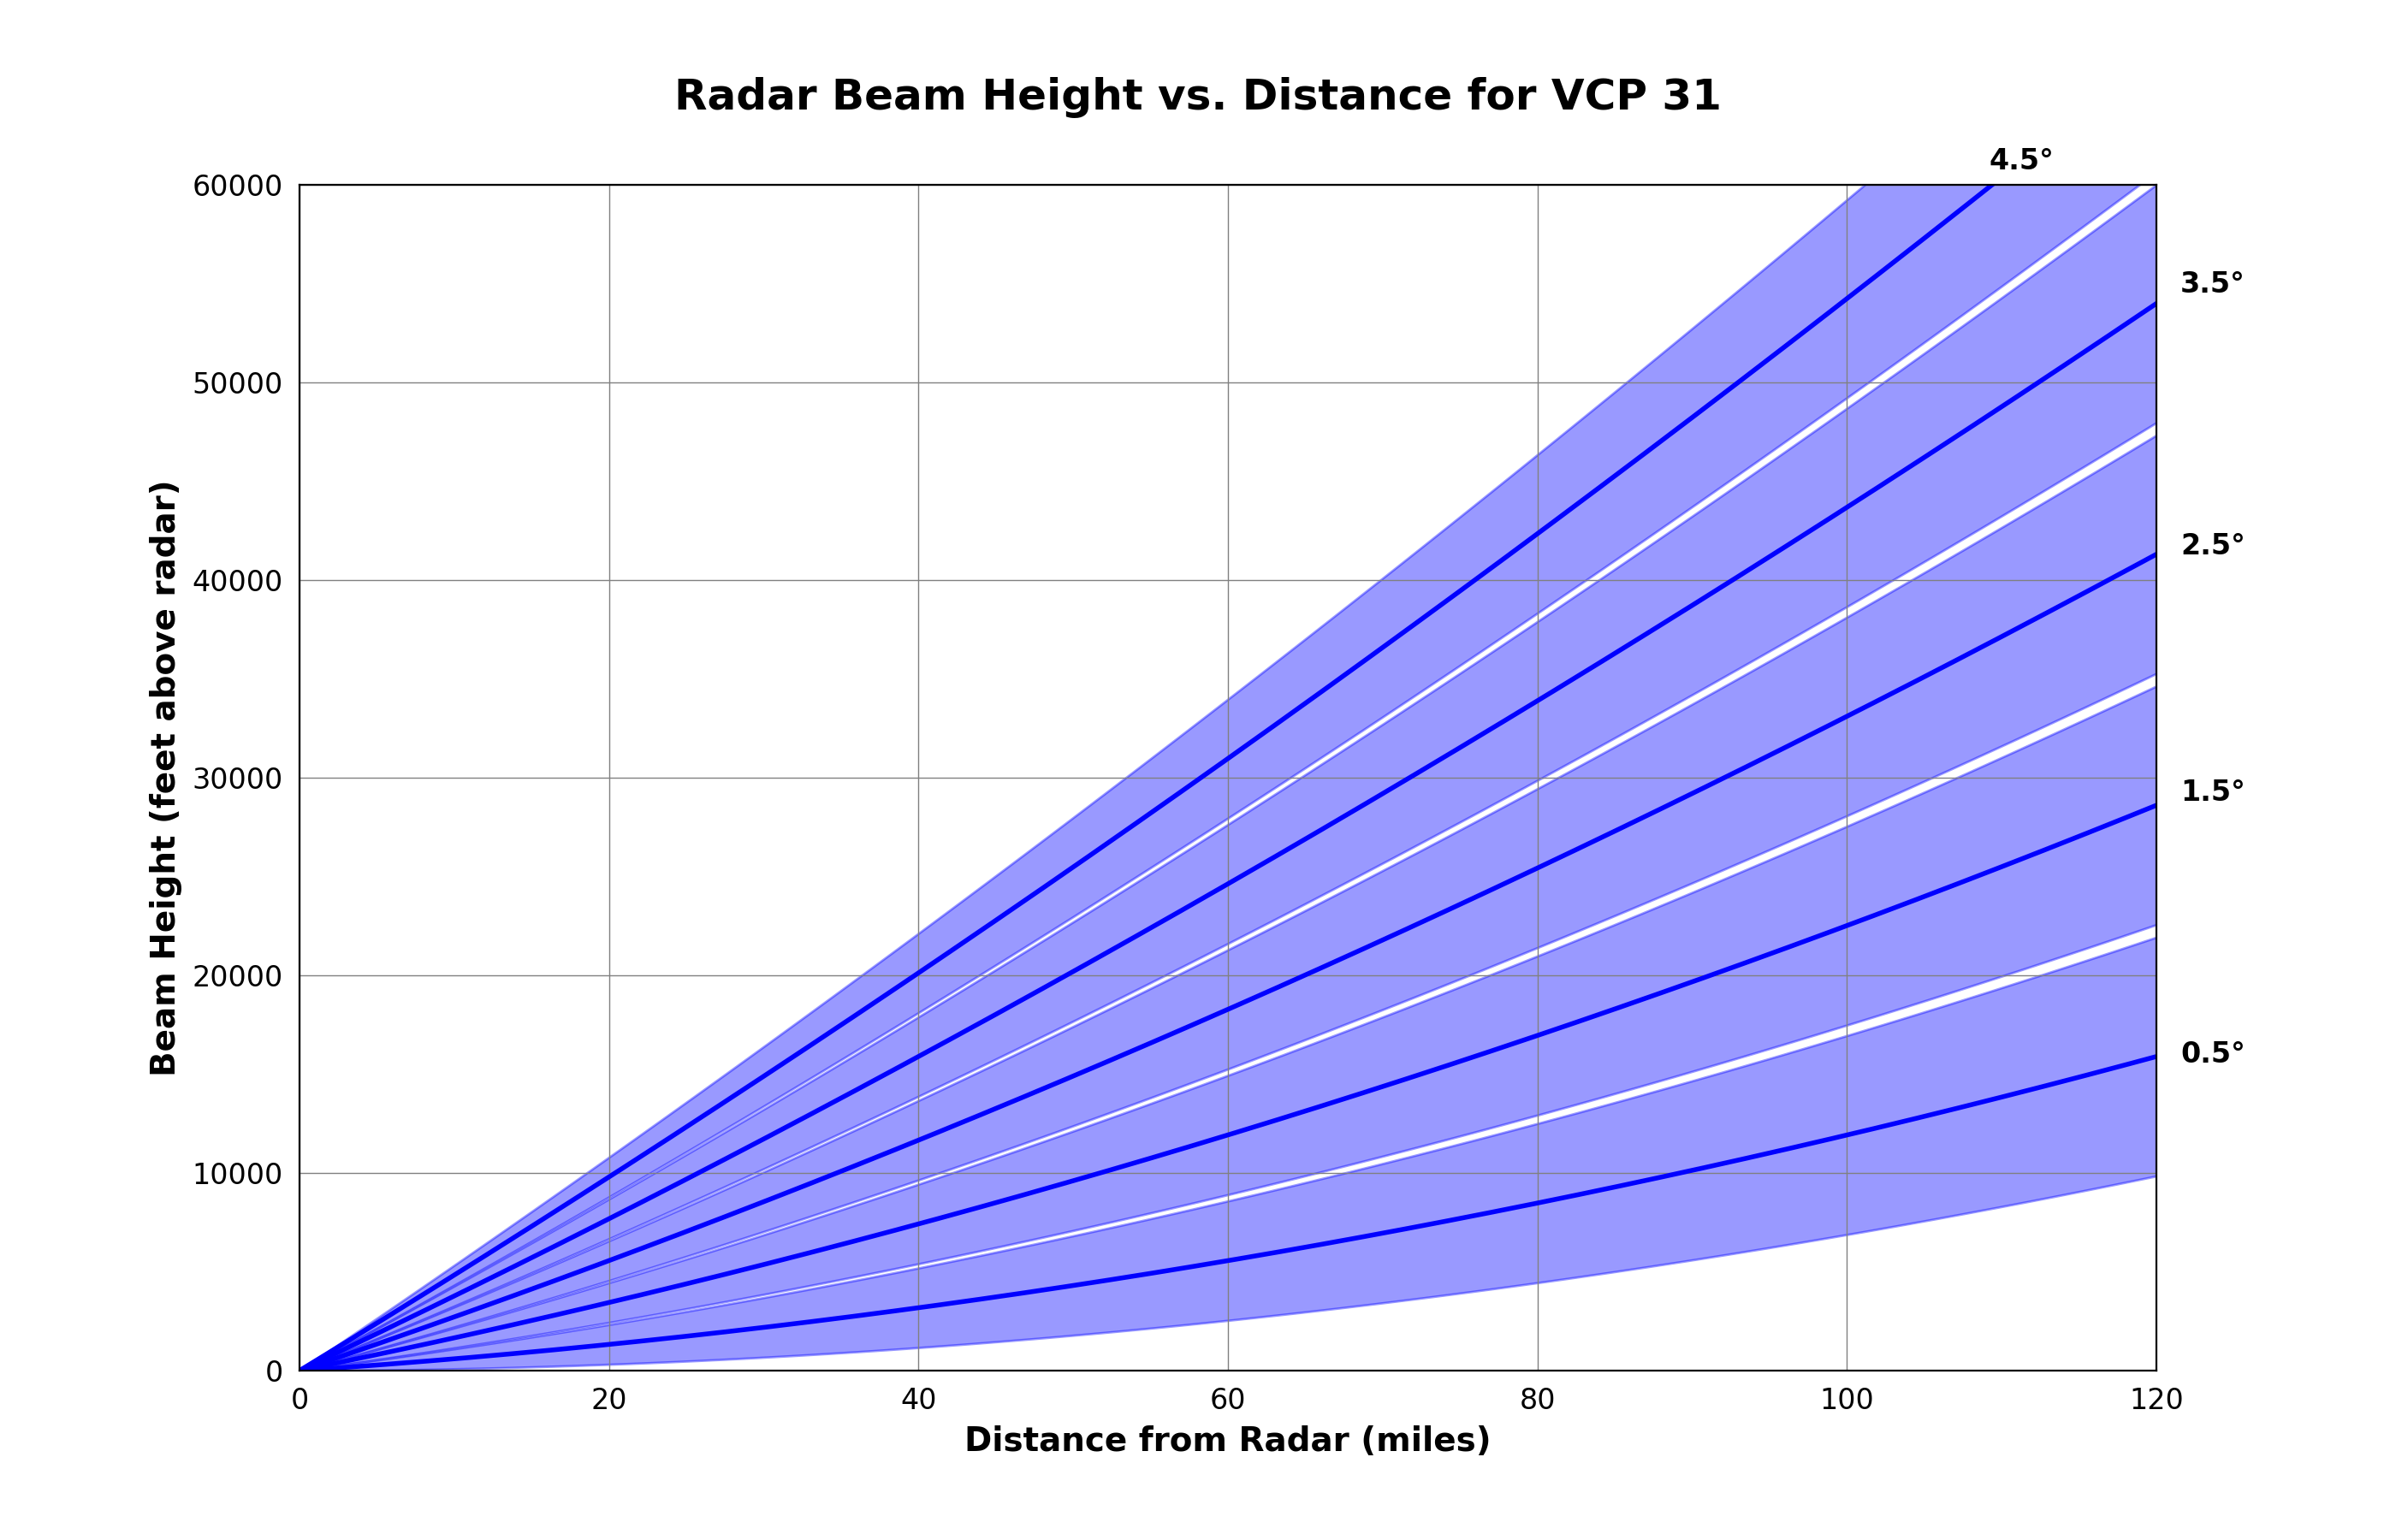 VCP 31 beam coverage. 5 elevation angles are scanned in around 10 minutes.